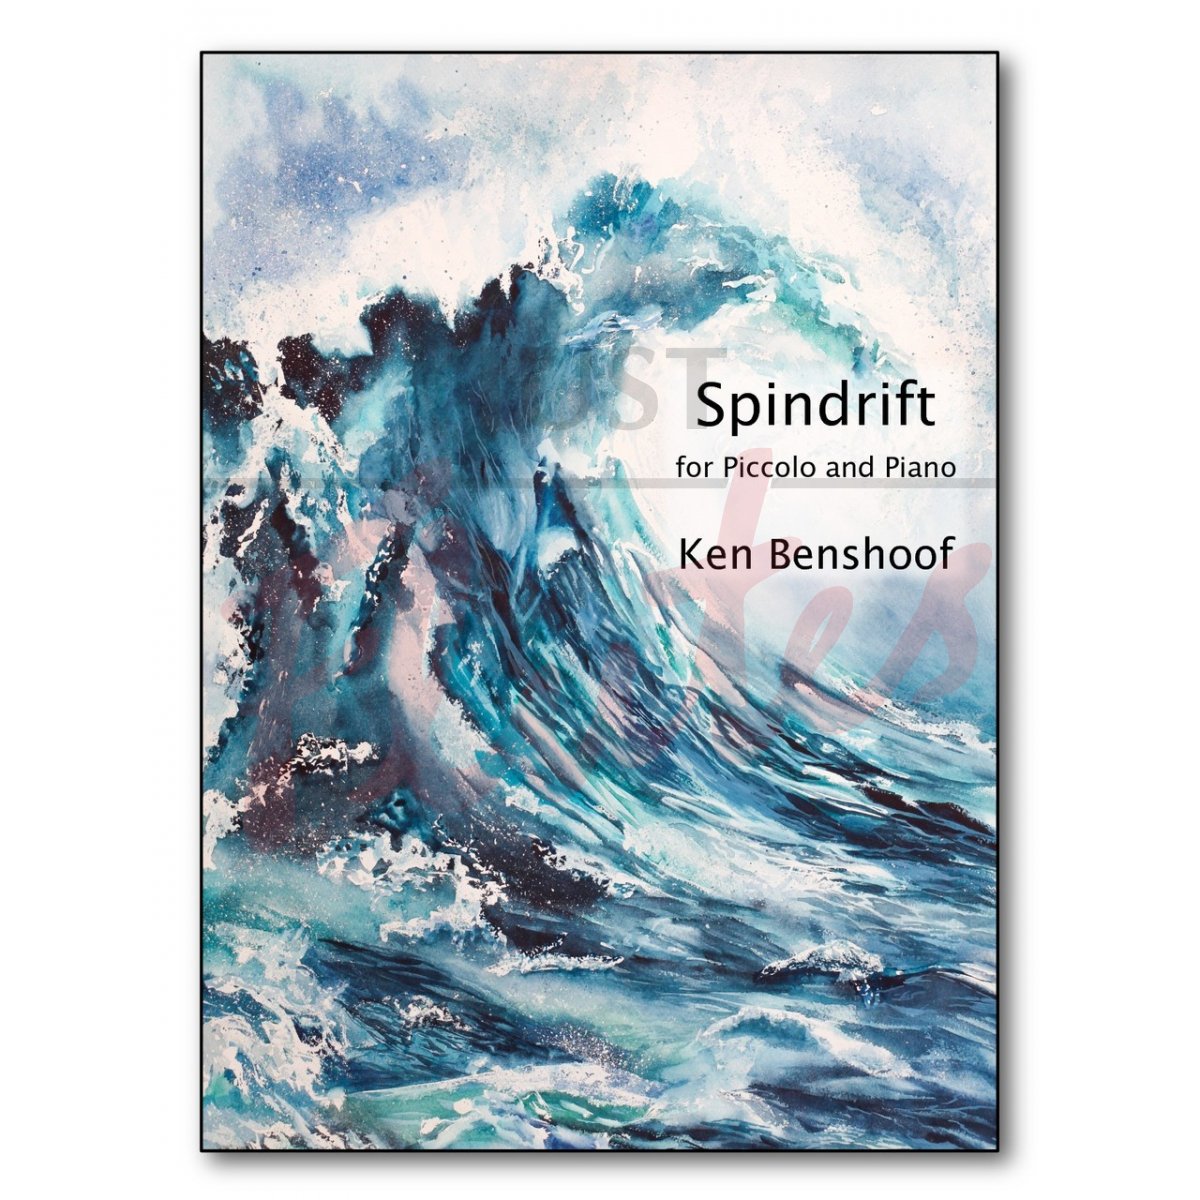 Spindrift for Piccolo and Piano